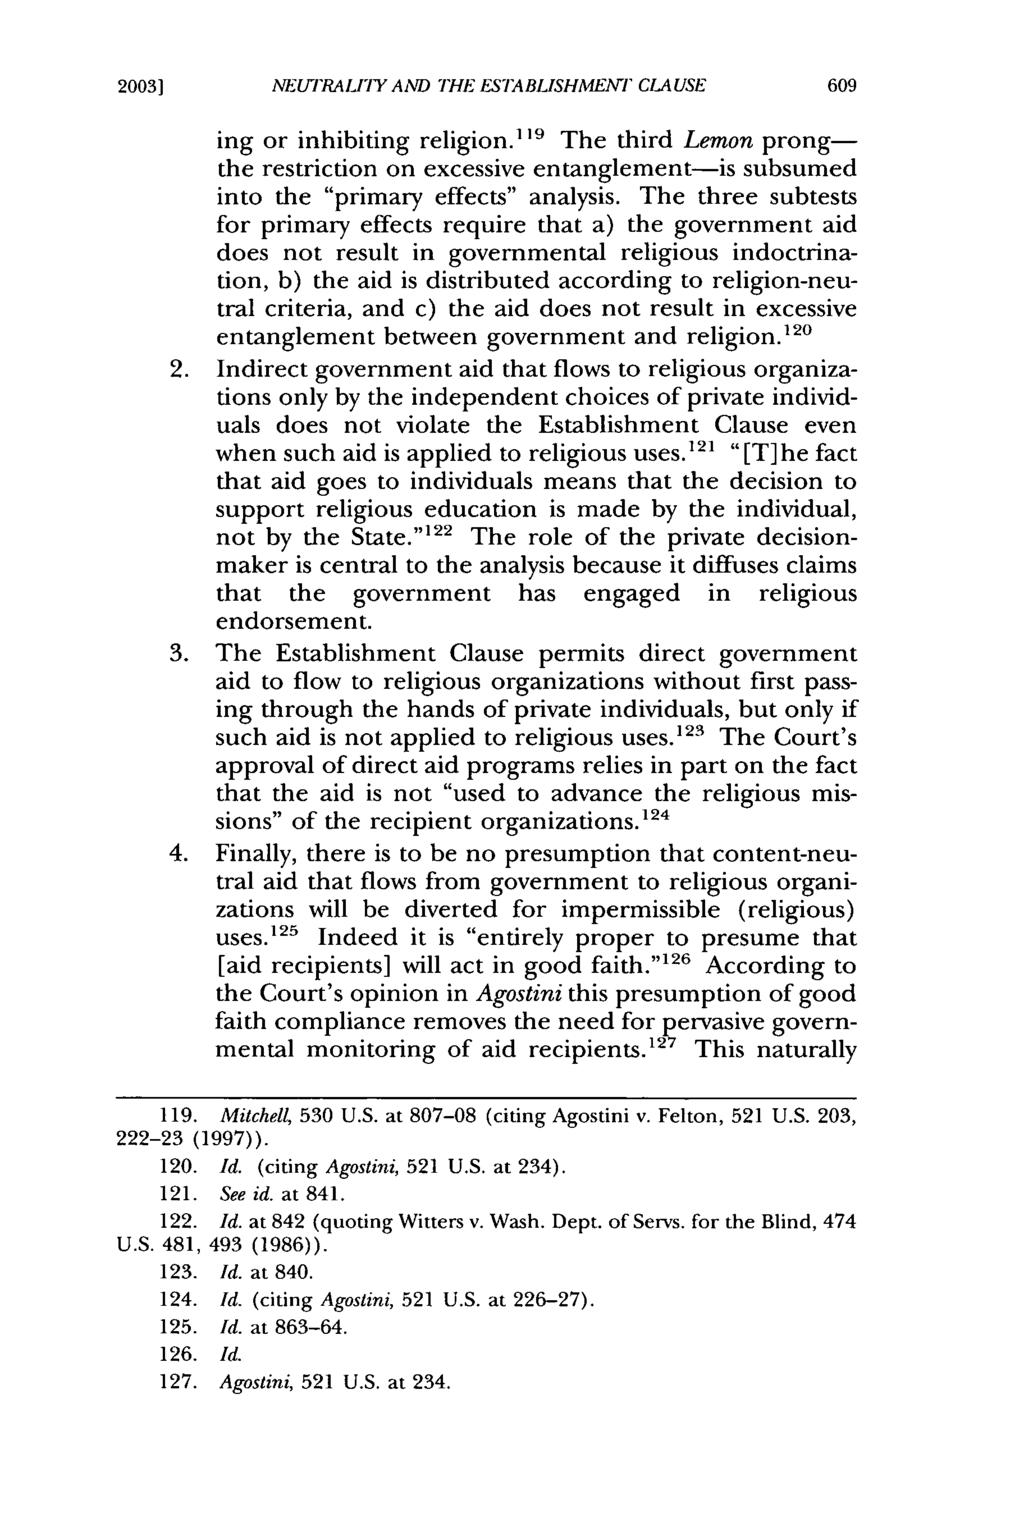 20031 ]NEUIRAI7Y AD THE ESTABIJSHMEAr' CLAUSE ing or inhibiting religion.' 19 The third Lemon prongthe restriction on excessive entanglement-is subsumed into the "primary effects" analysis.